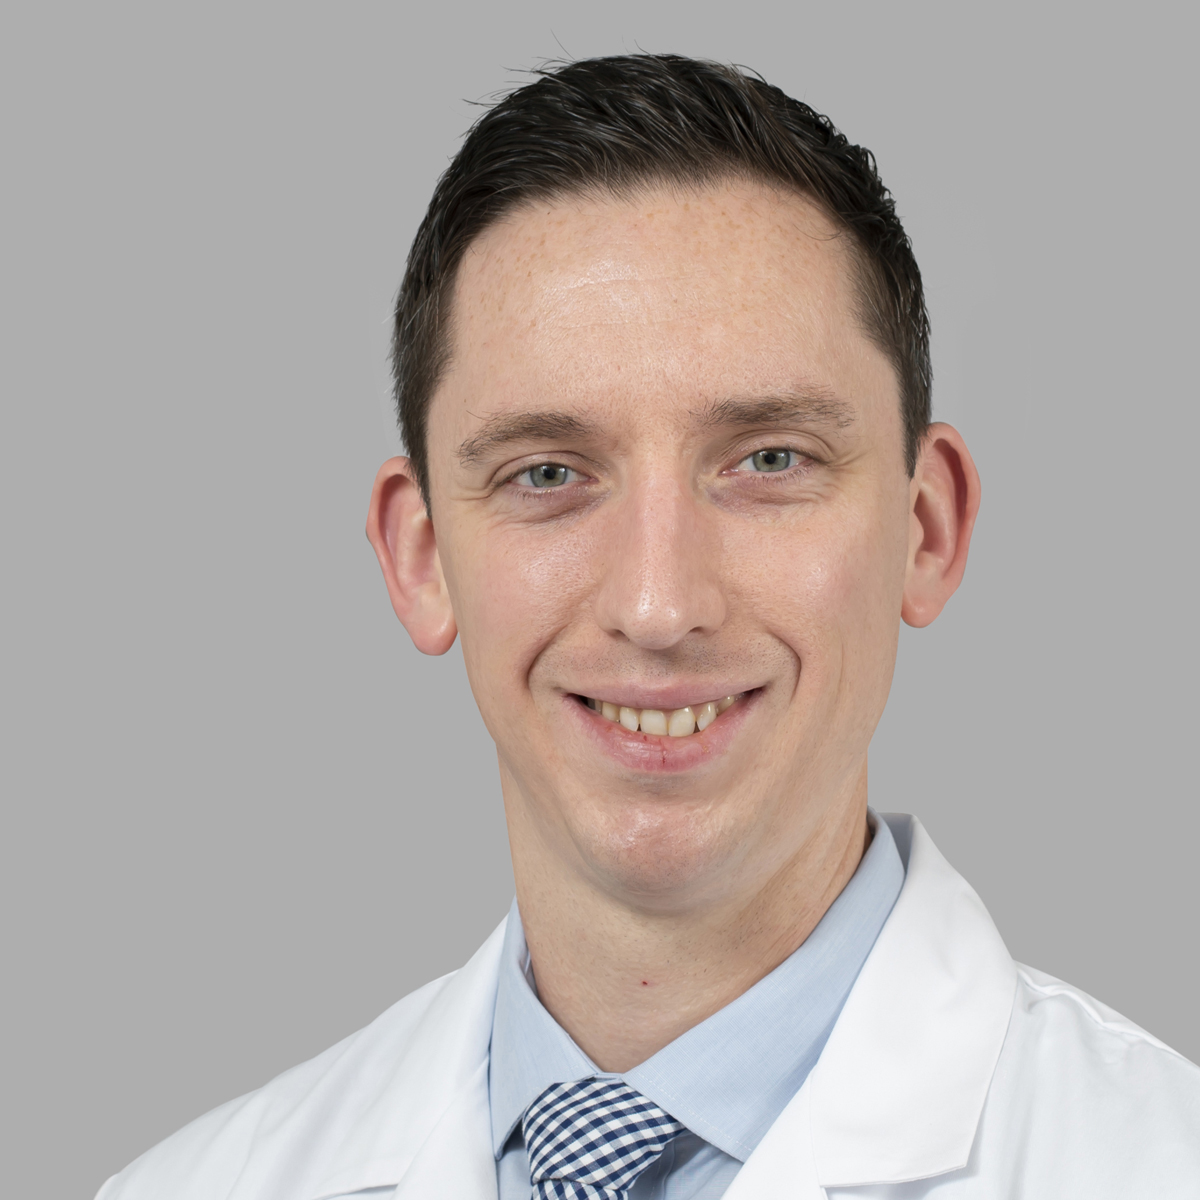 A friendly image of Jeffrey Donahue, MD